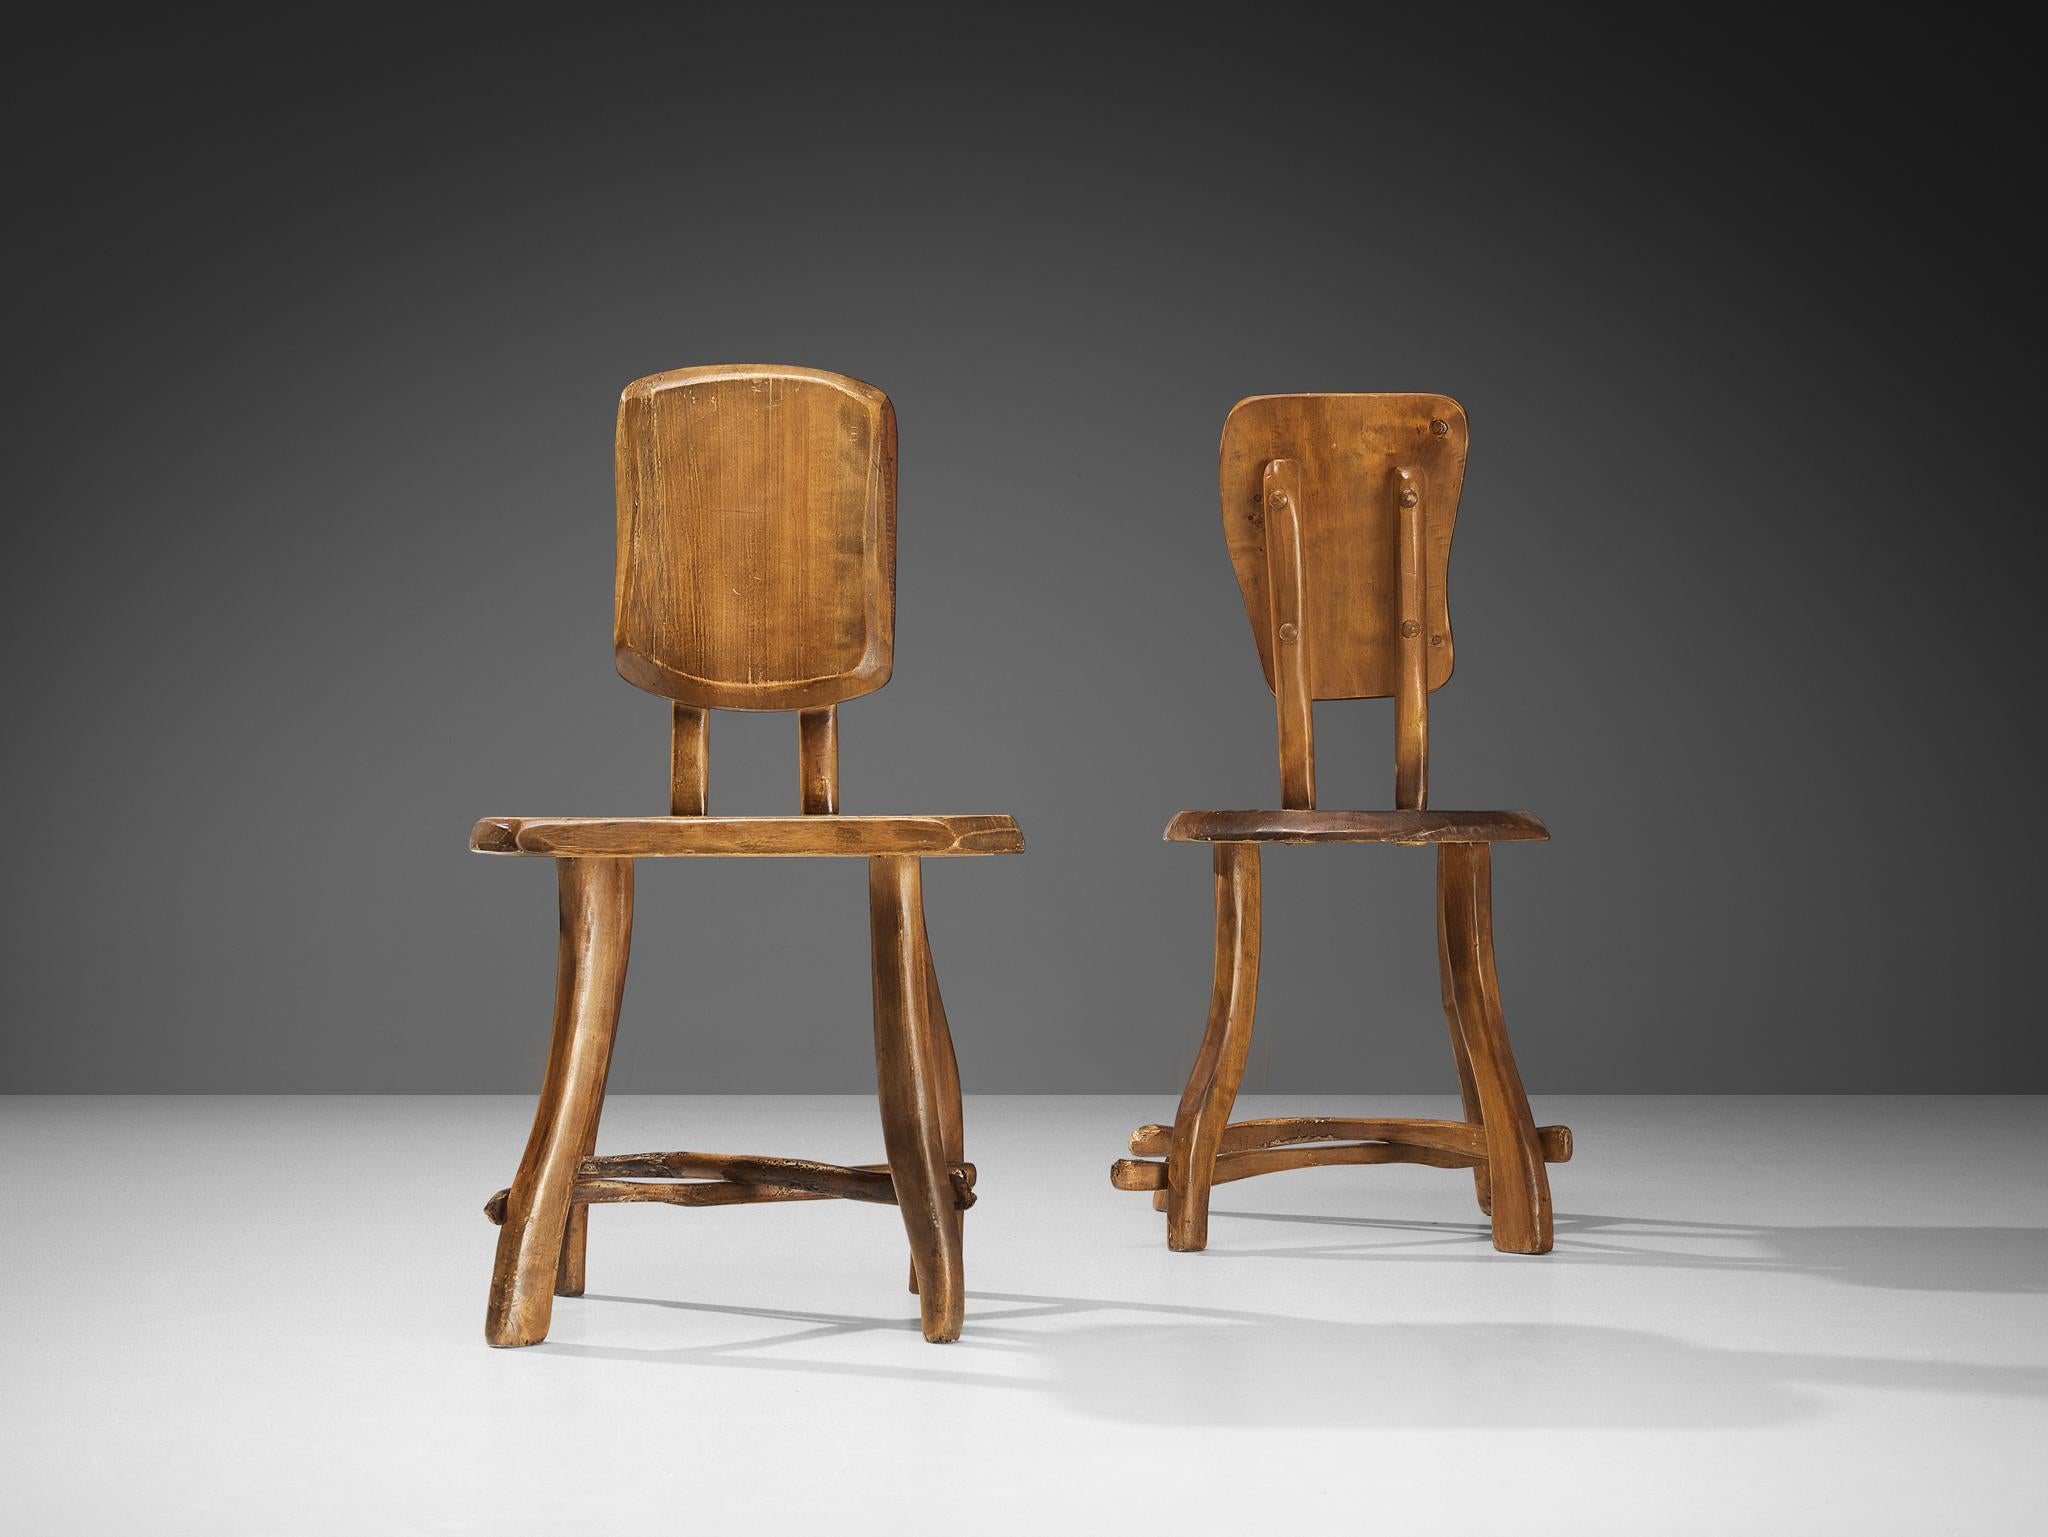 Brutalist chairs, maple, Europe 1960s 

Beautiful and naturalistic chairs made in Europe in the 1960s. The backrest of these pieces consists of a large piece of maple wood. Another slab is used for the seat. These chairs have a subtle cross-shape